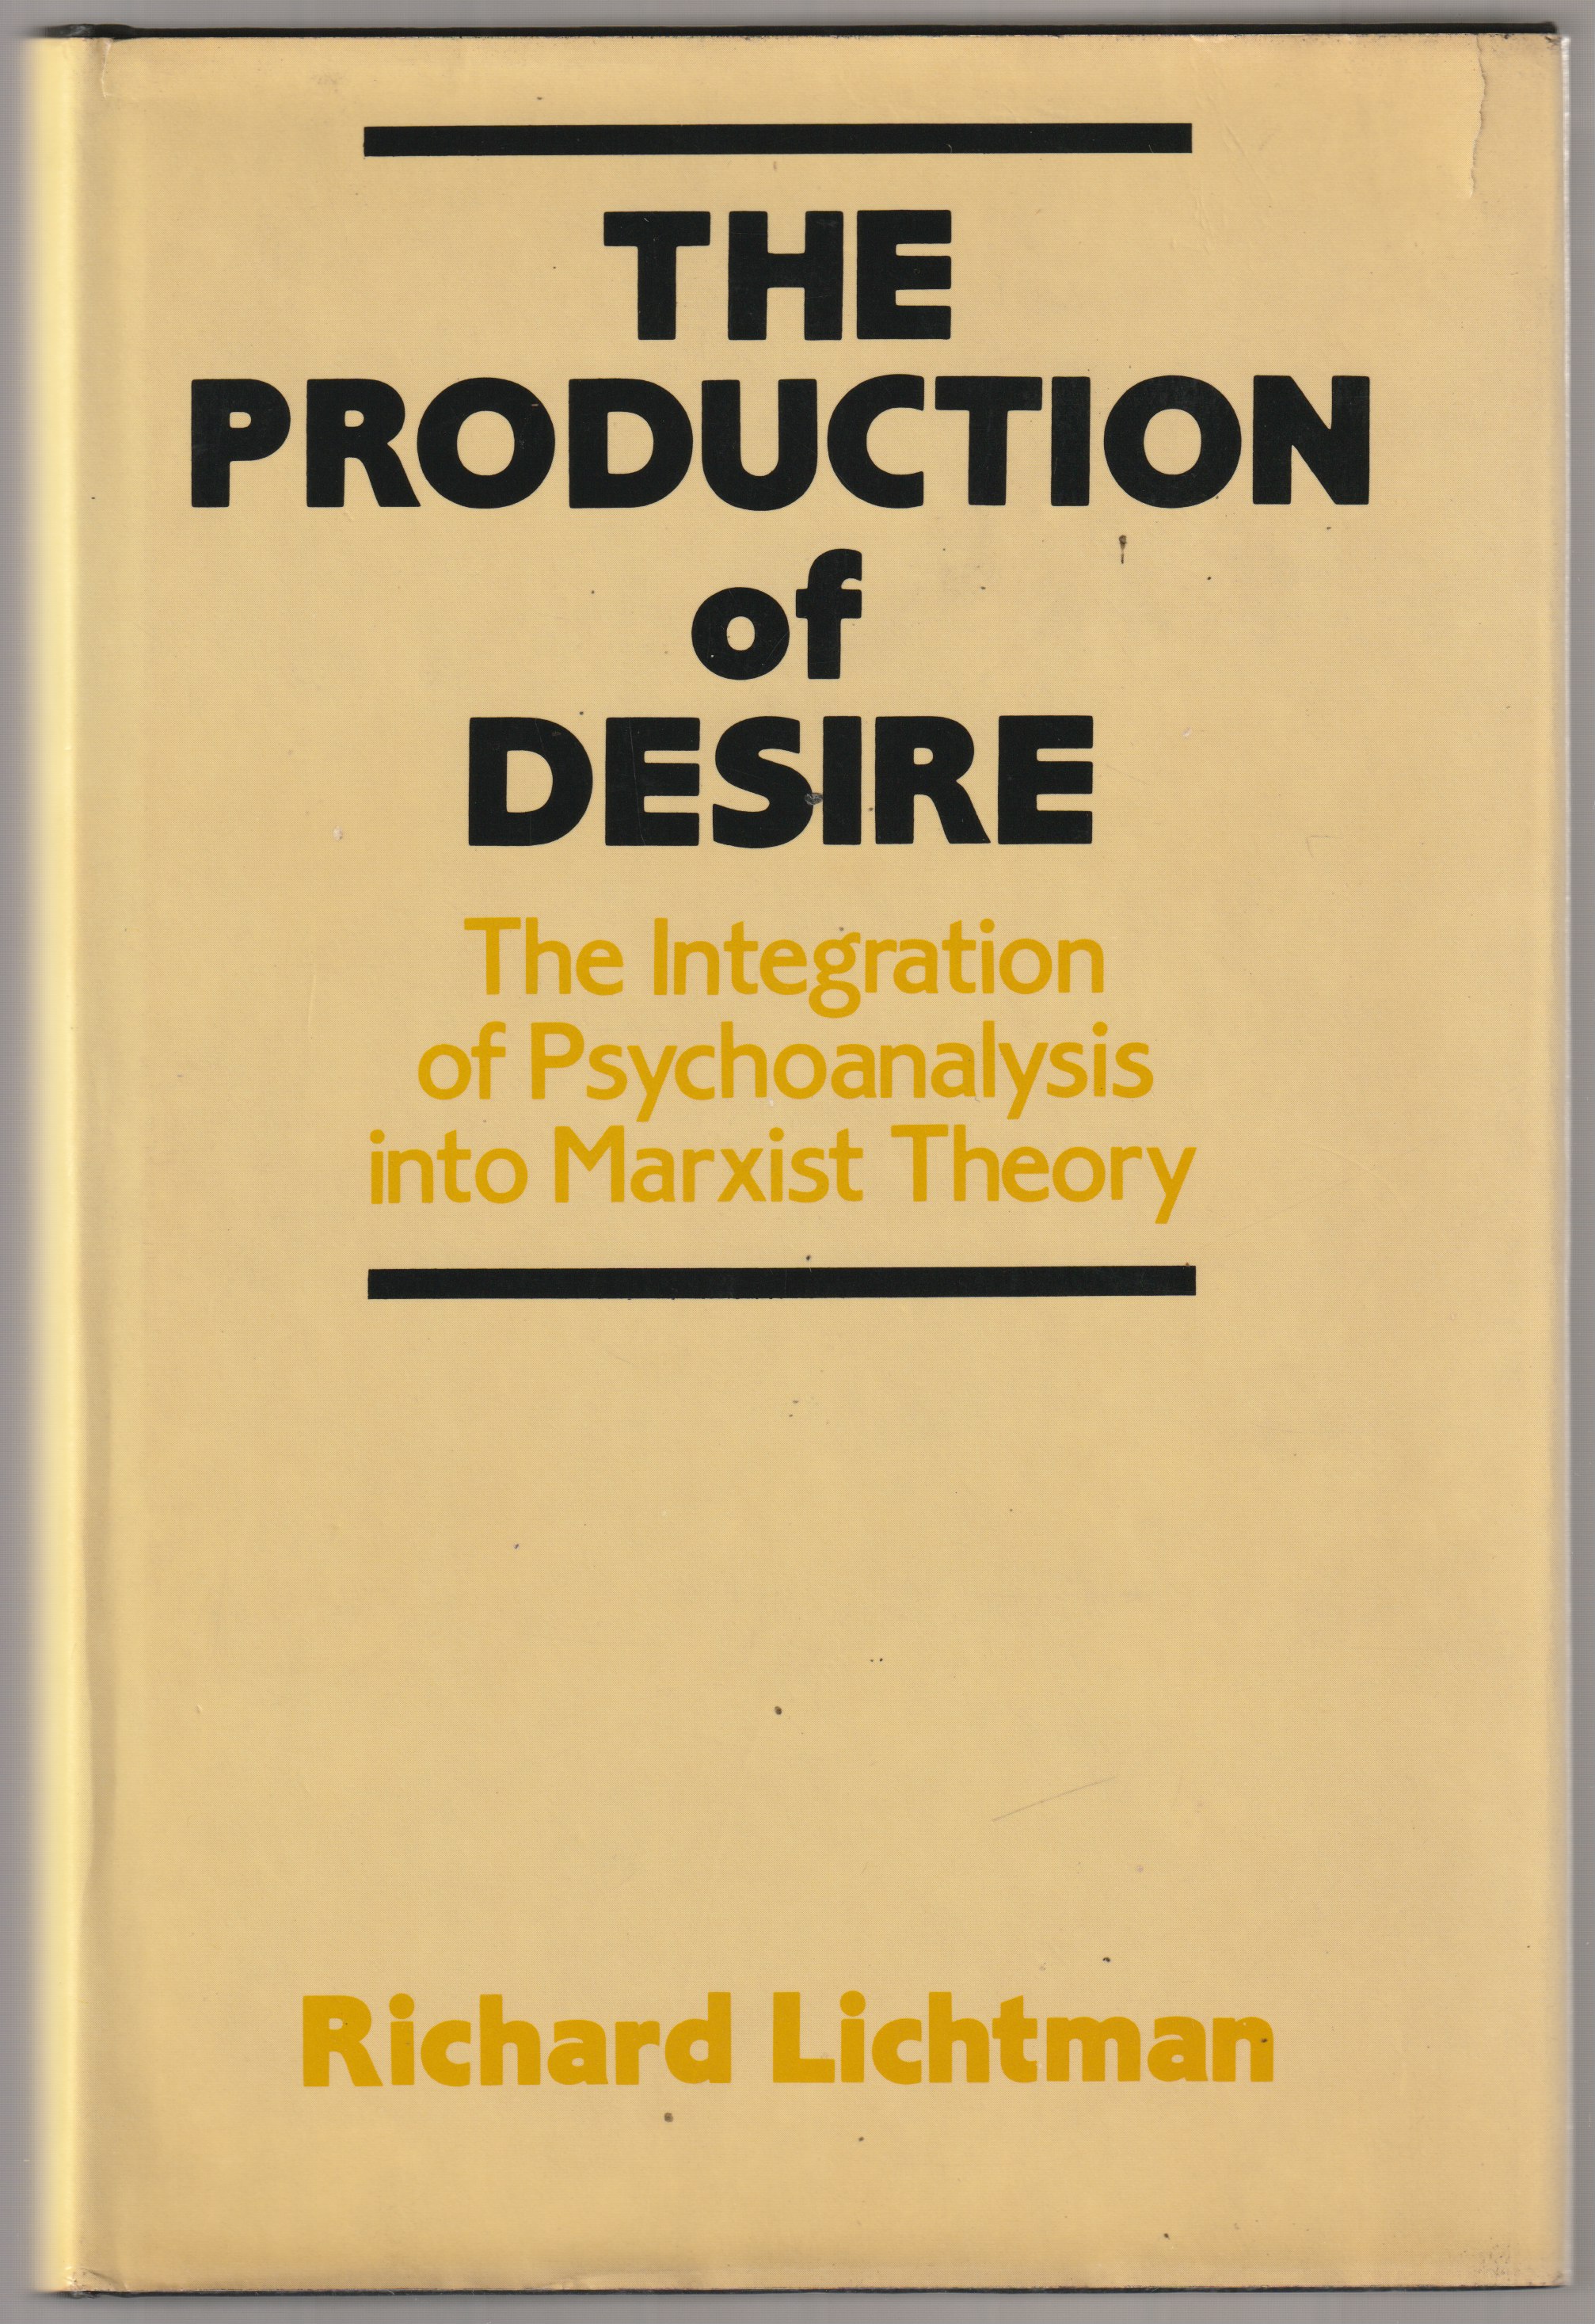 The production of desire : the integration of psychoanalysis into Marxist theory.